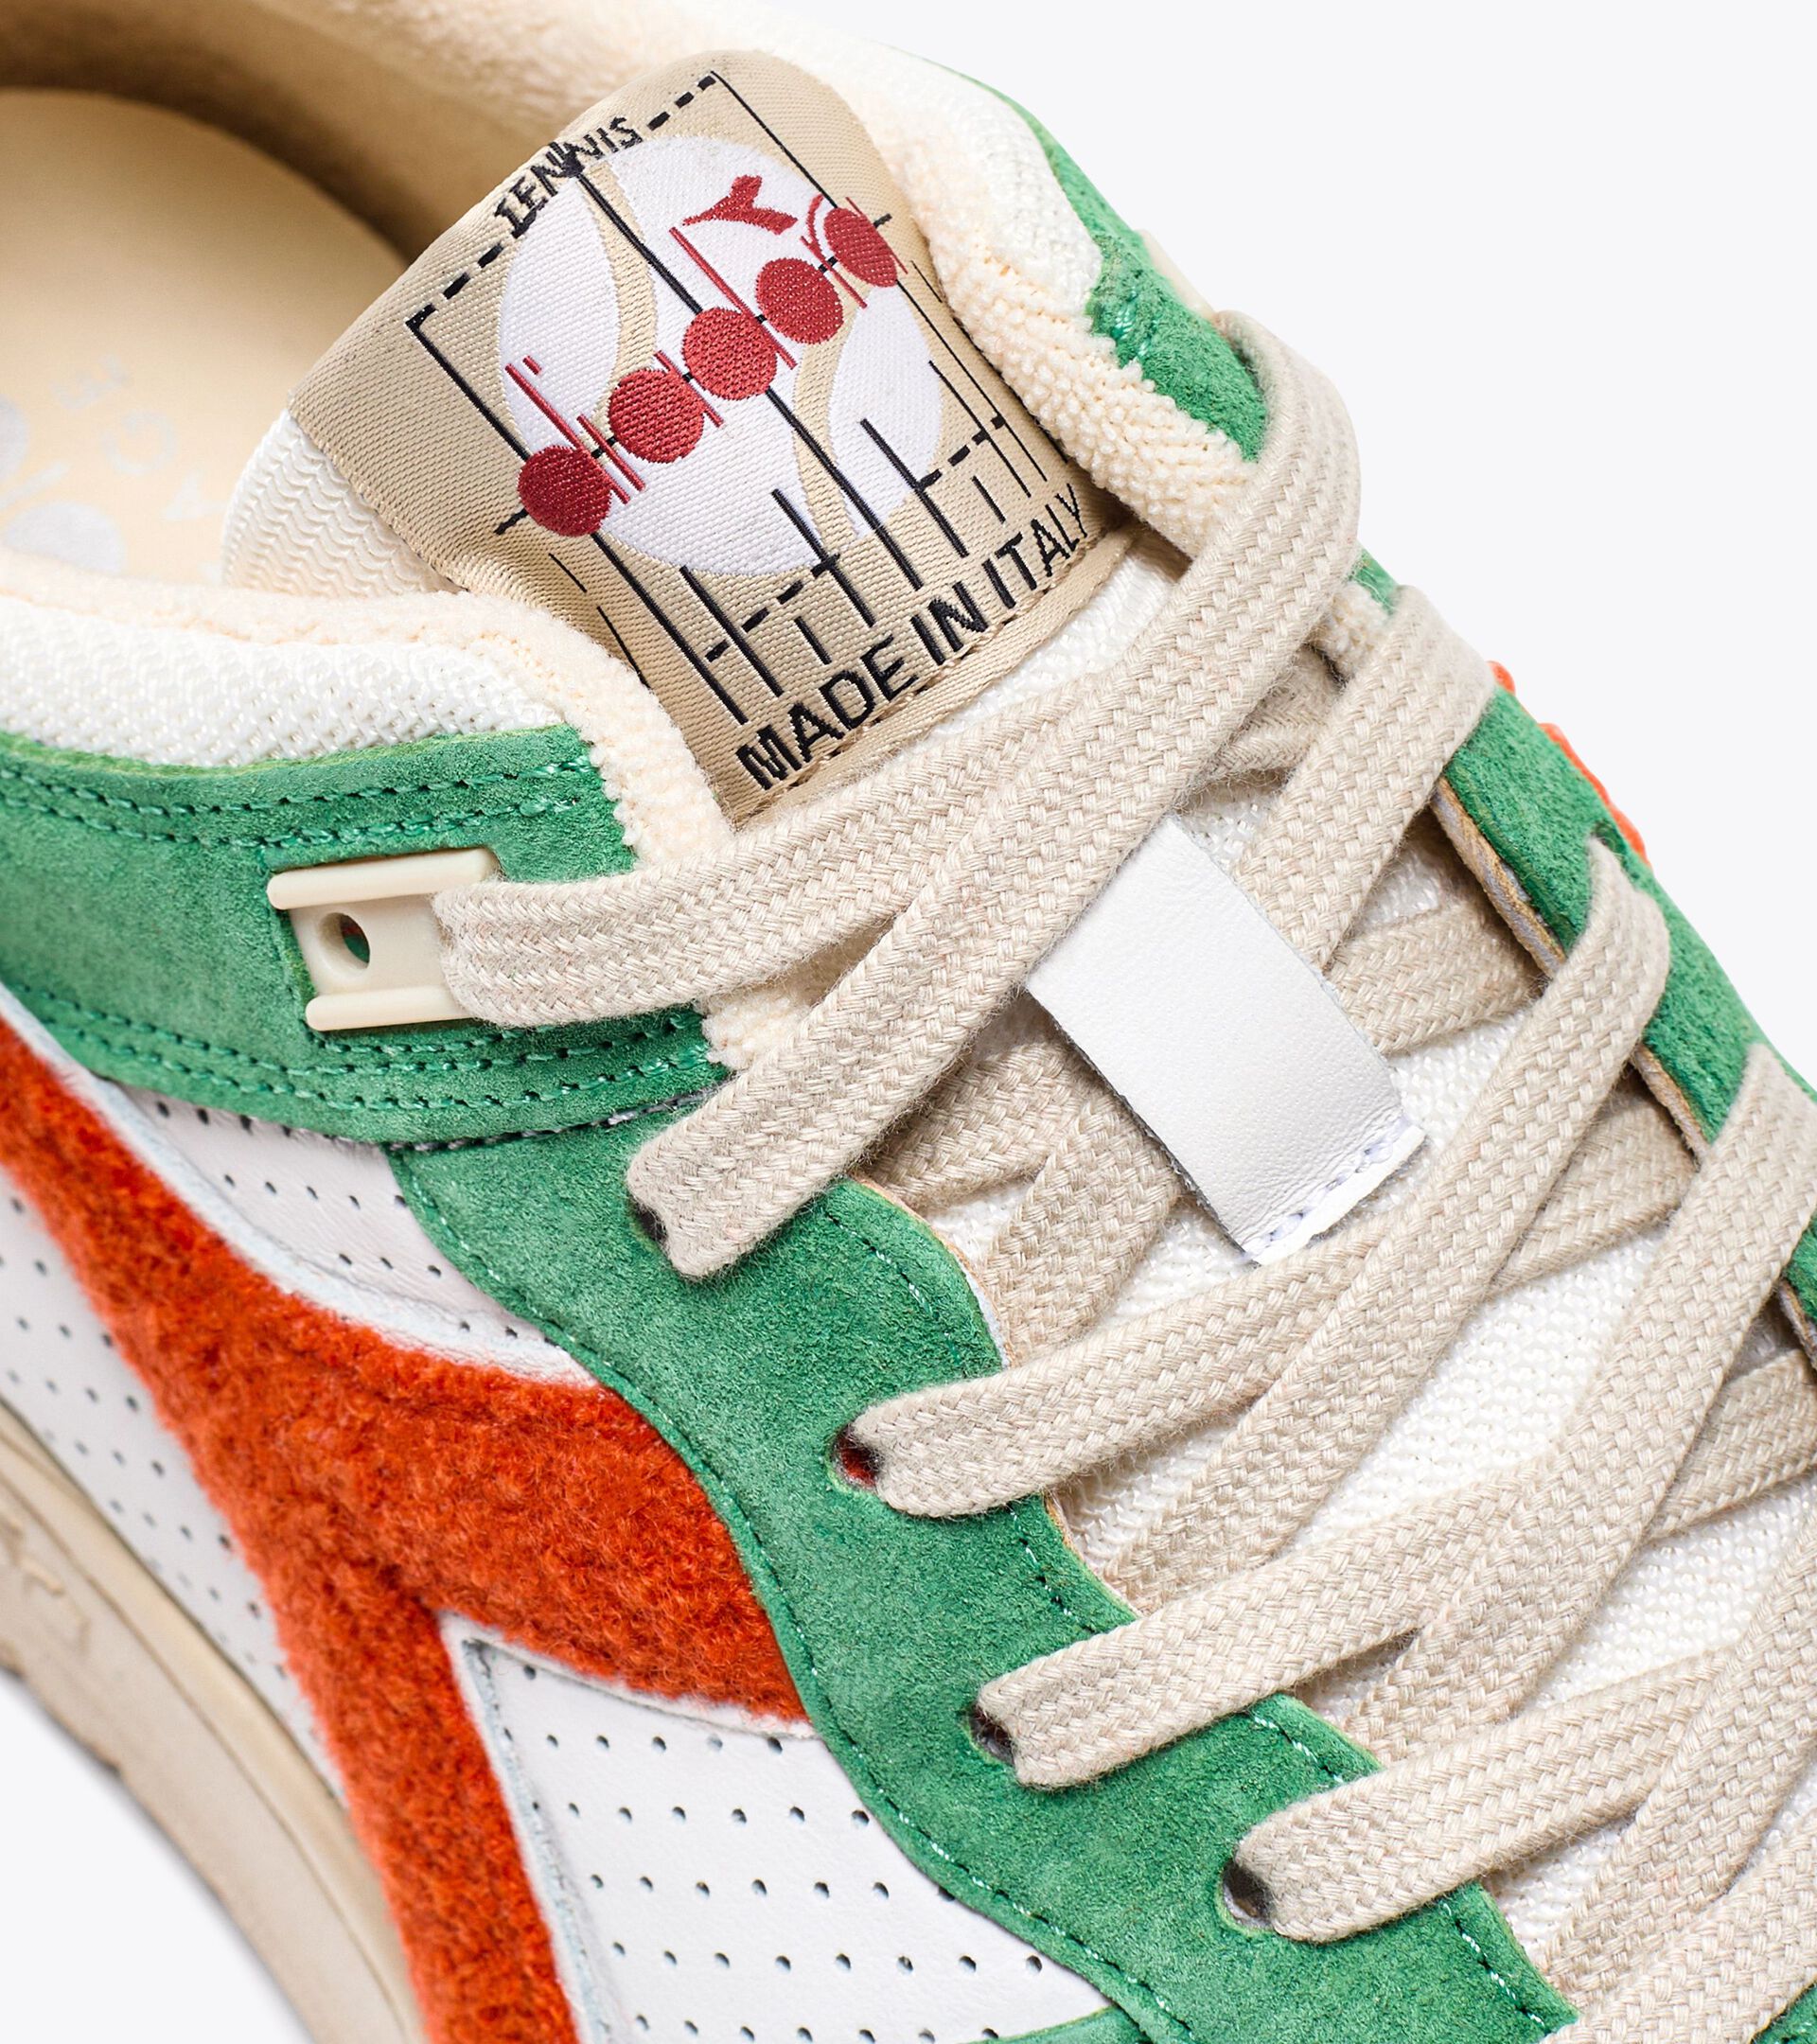 B.560 USED RR ITALIA Heritage sneakers - Made in Italy - Gender Neutral -  Diadora Online Store US